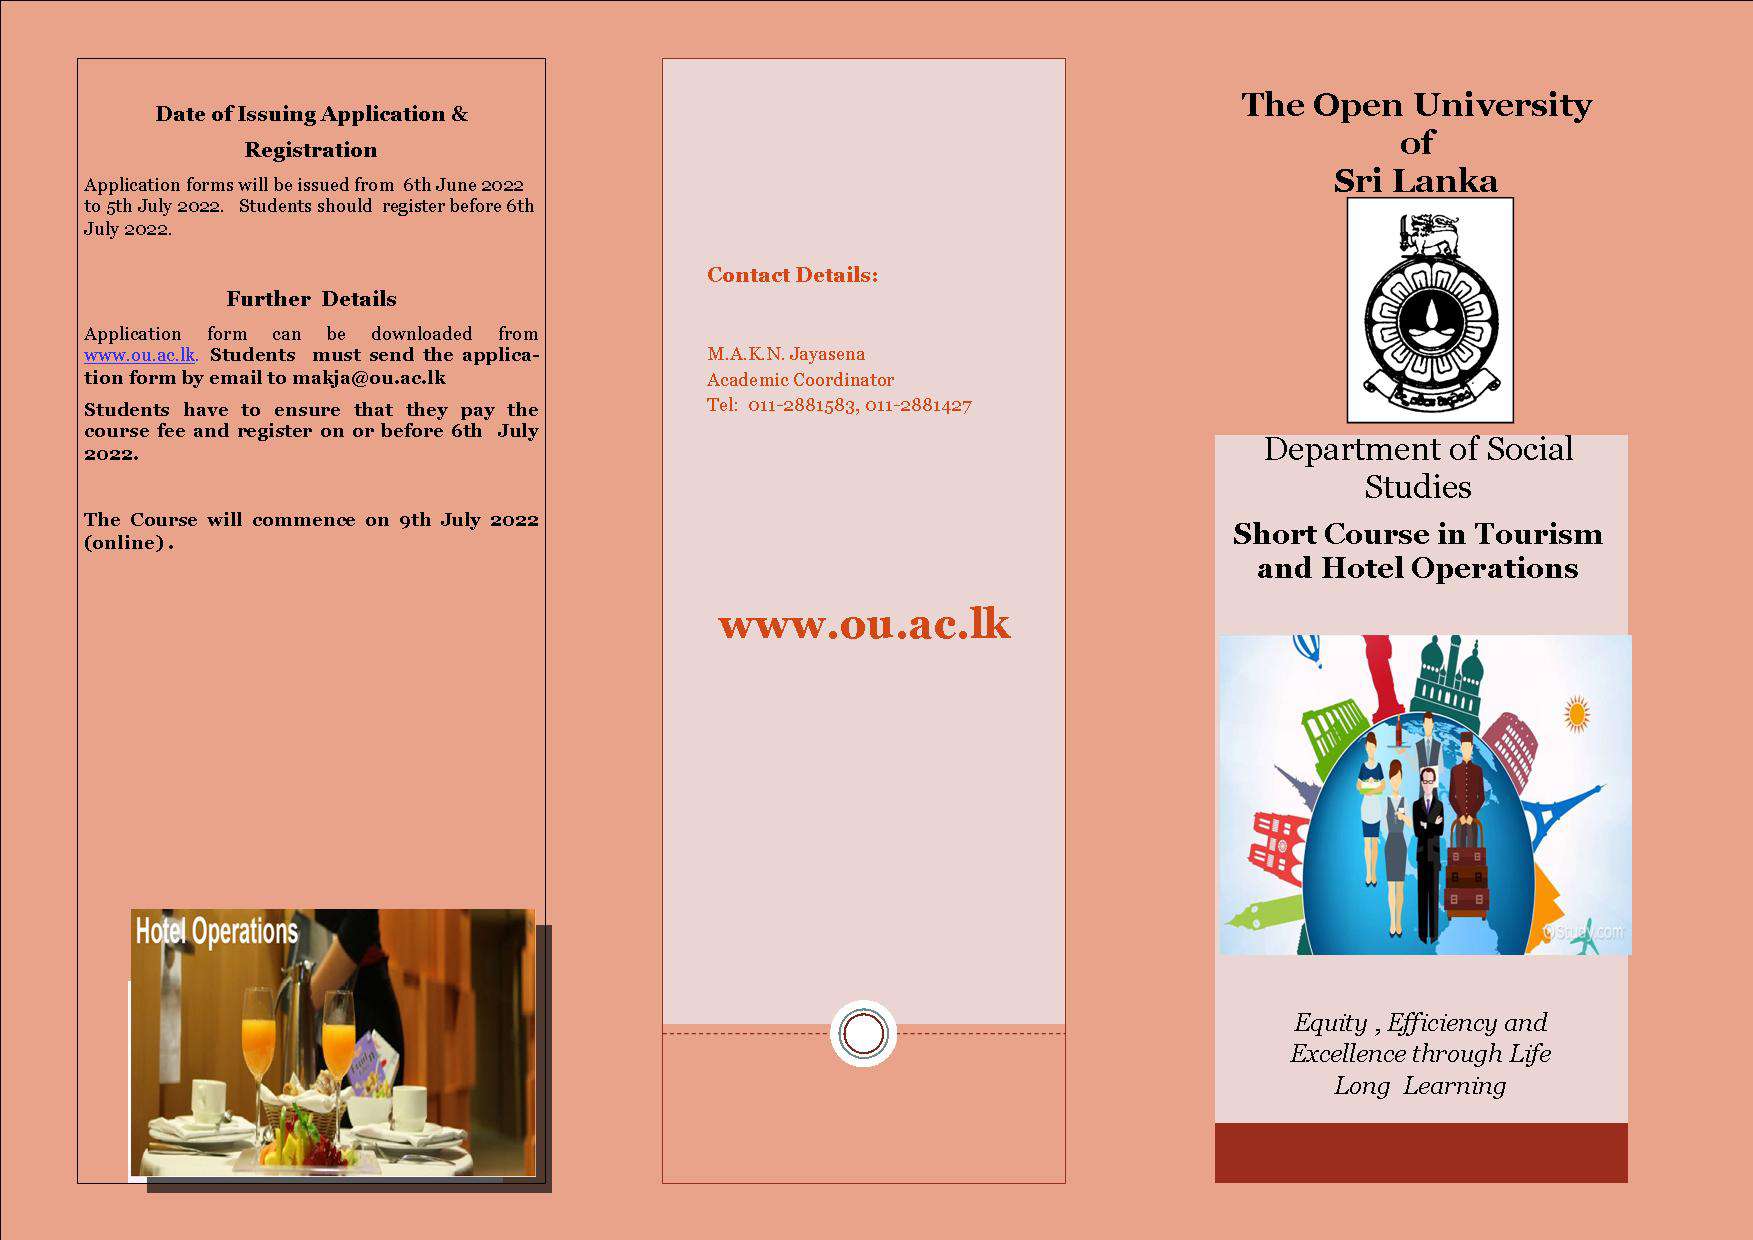 Short Course in Tourism and Hotel Operation (Online) 2022 - The Open University of Sri Lanka (OUSL)